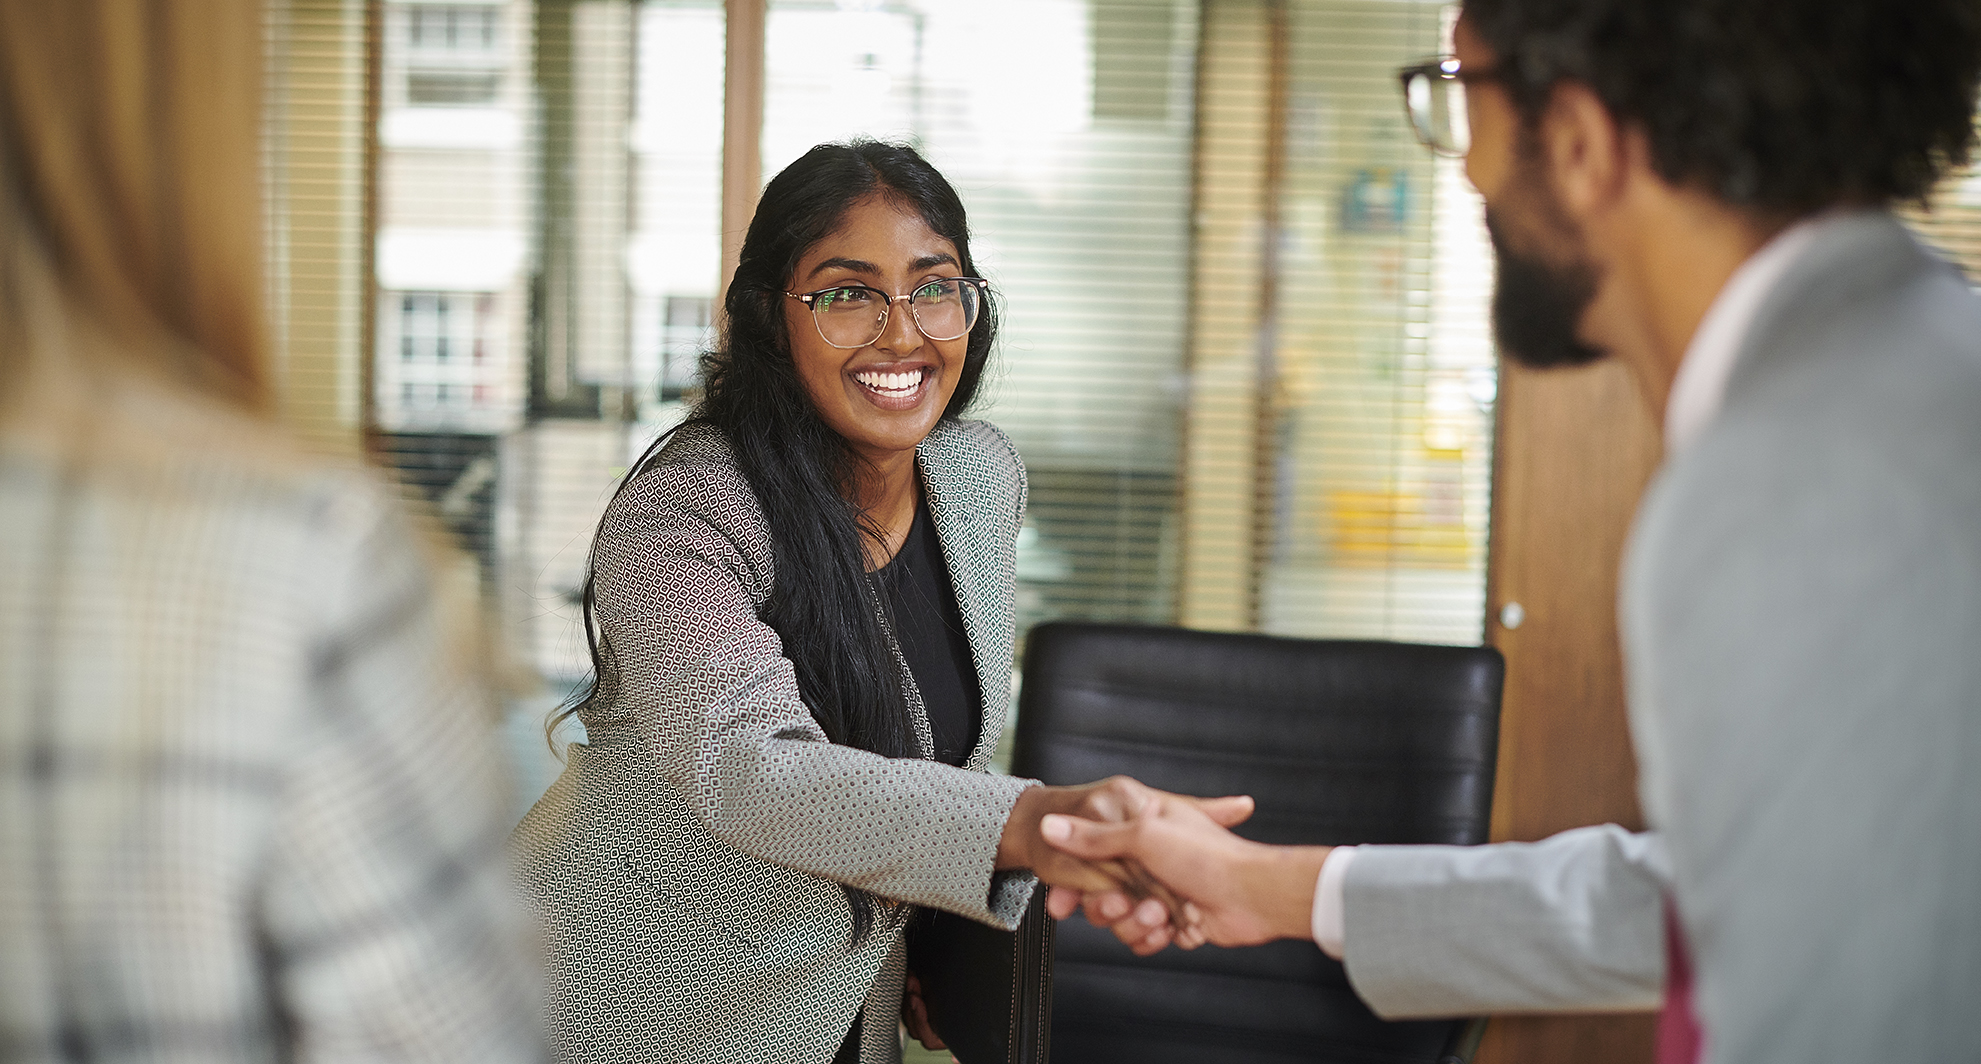 Image of young woman in a business suit shaking hands with prospective employer